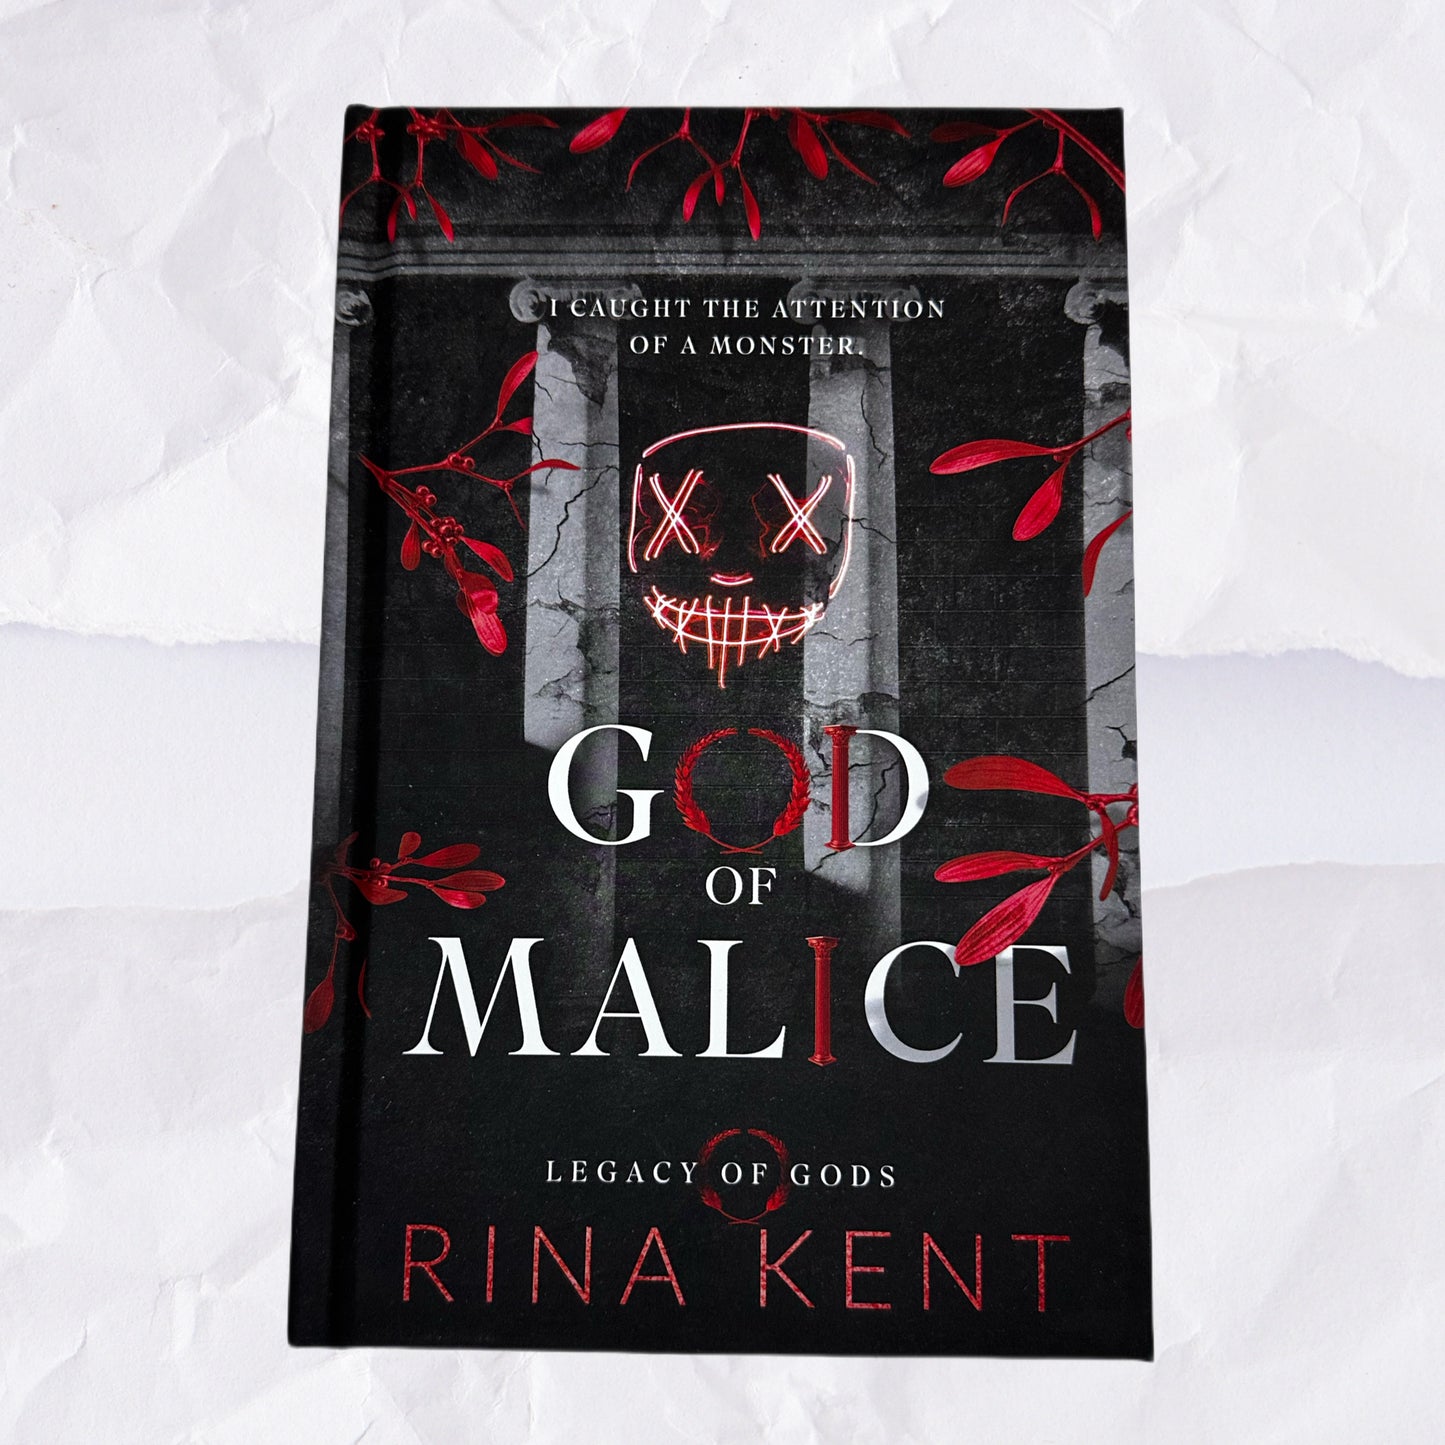 God of Malice (Legacy of Gods #1) by Rina Kent - Special Edition Print - Hardcover